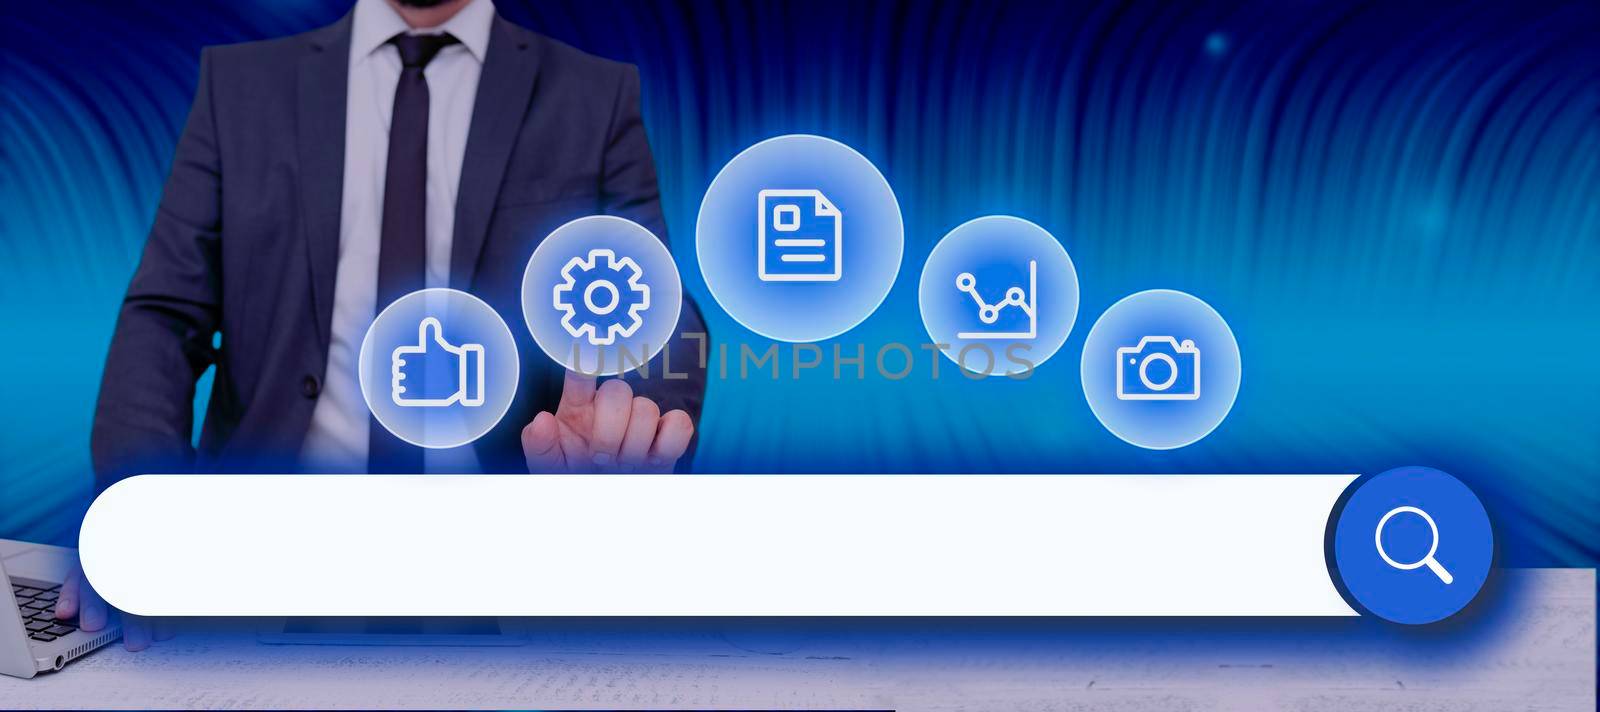 Businessman With A Laptop Pointing On Digital Synbols And Search Bar Looking For Data In An Abstract Design. Man In A Meeting And Checking Important Information And Concepts. by nialowwa